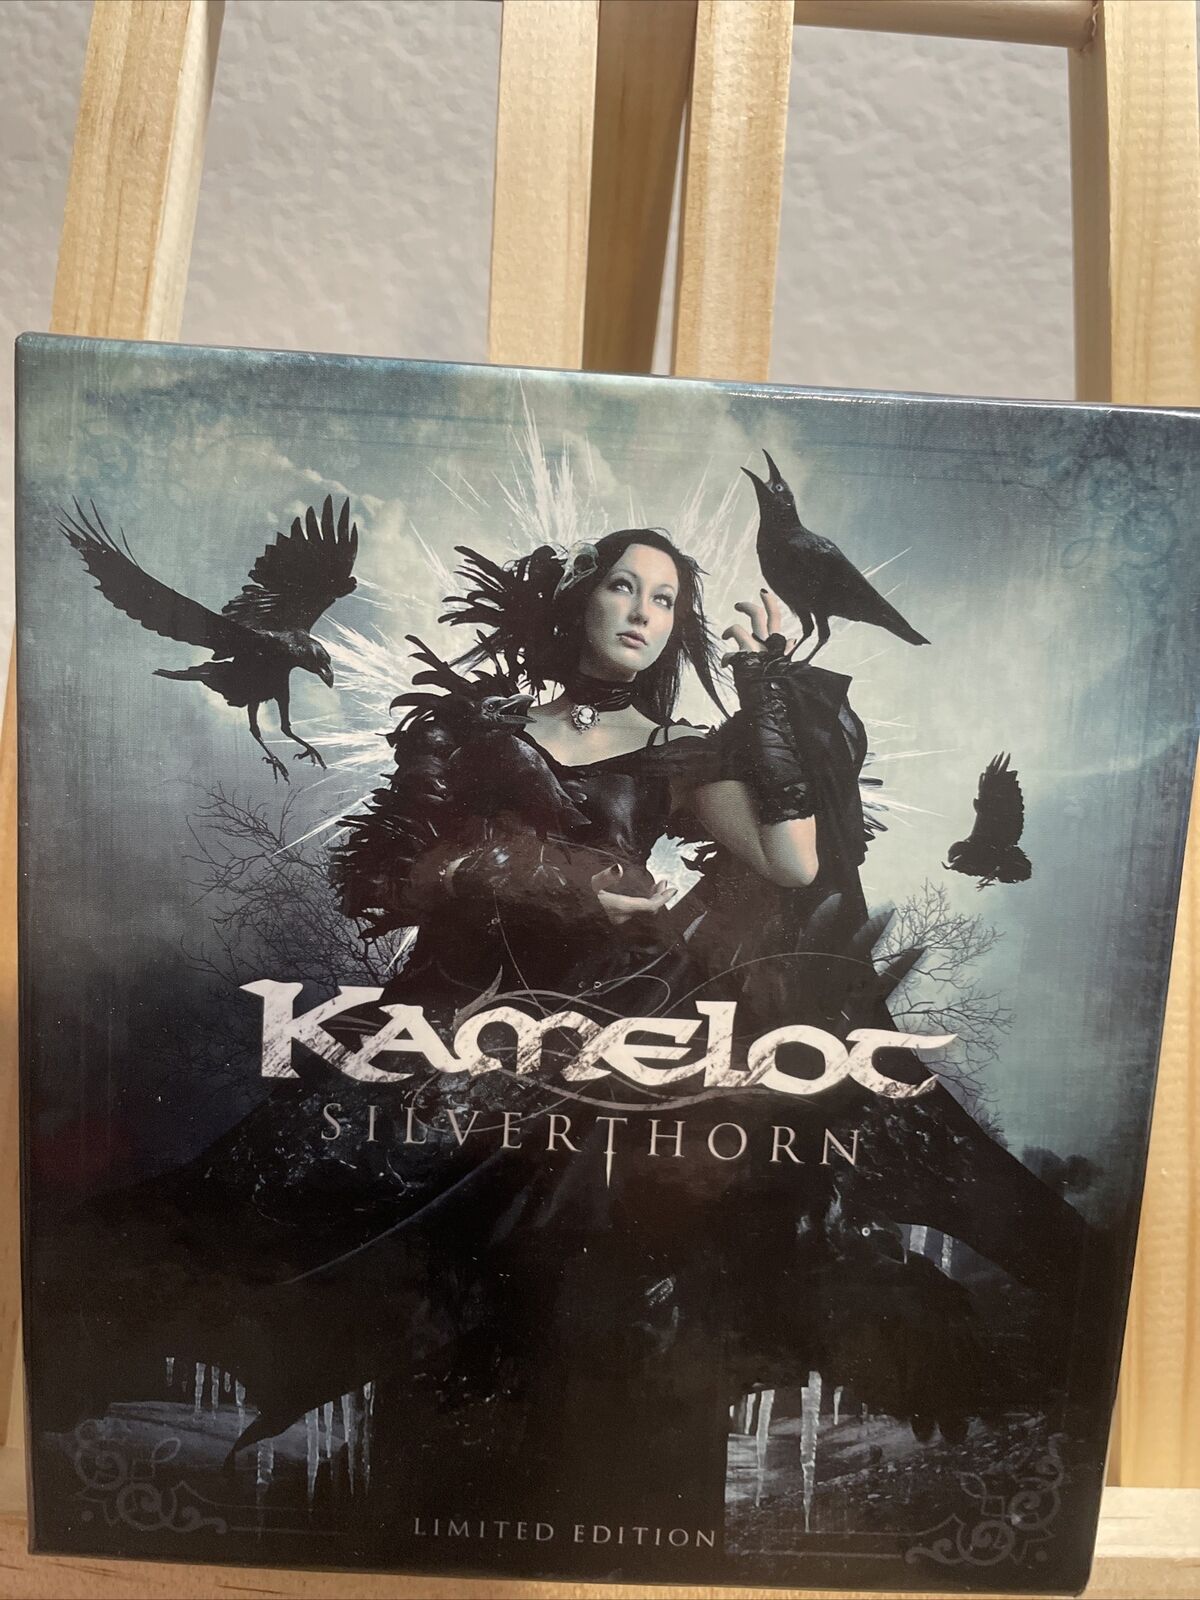 Silverthorn [Limited Edition] by Kamelot (U.S.) (CD, Oct-2012, 2 Discs, SPV)